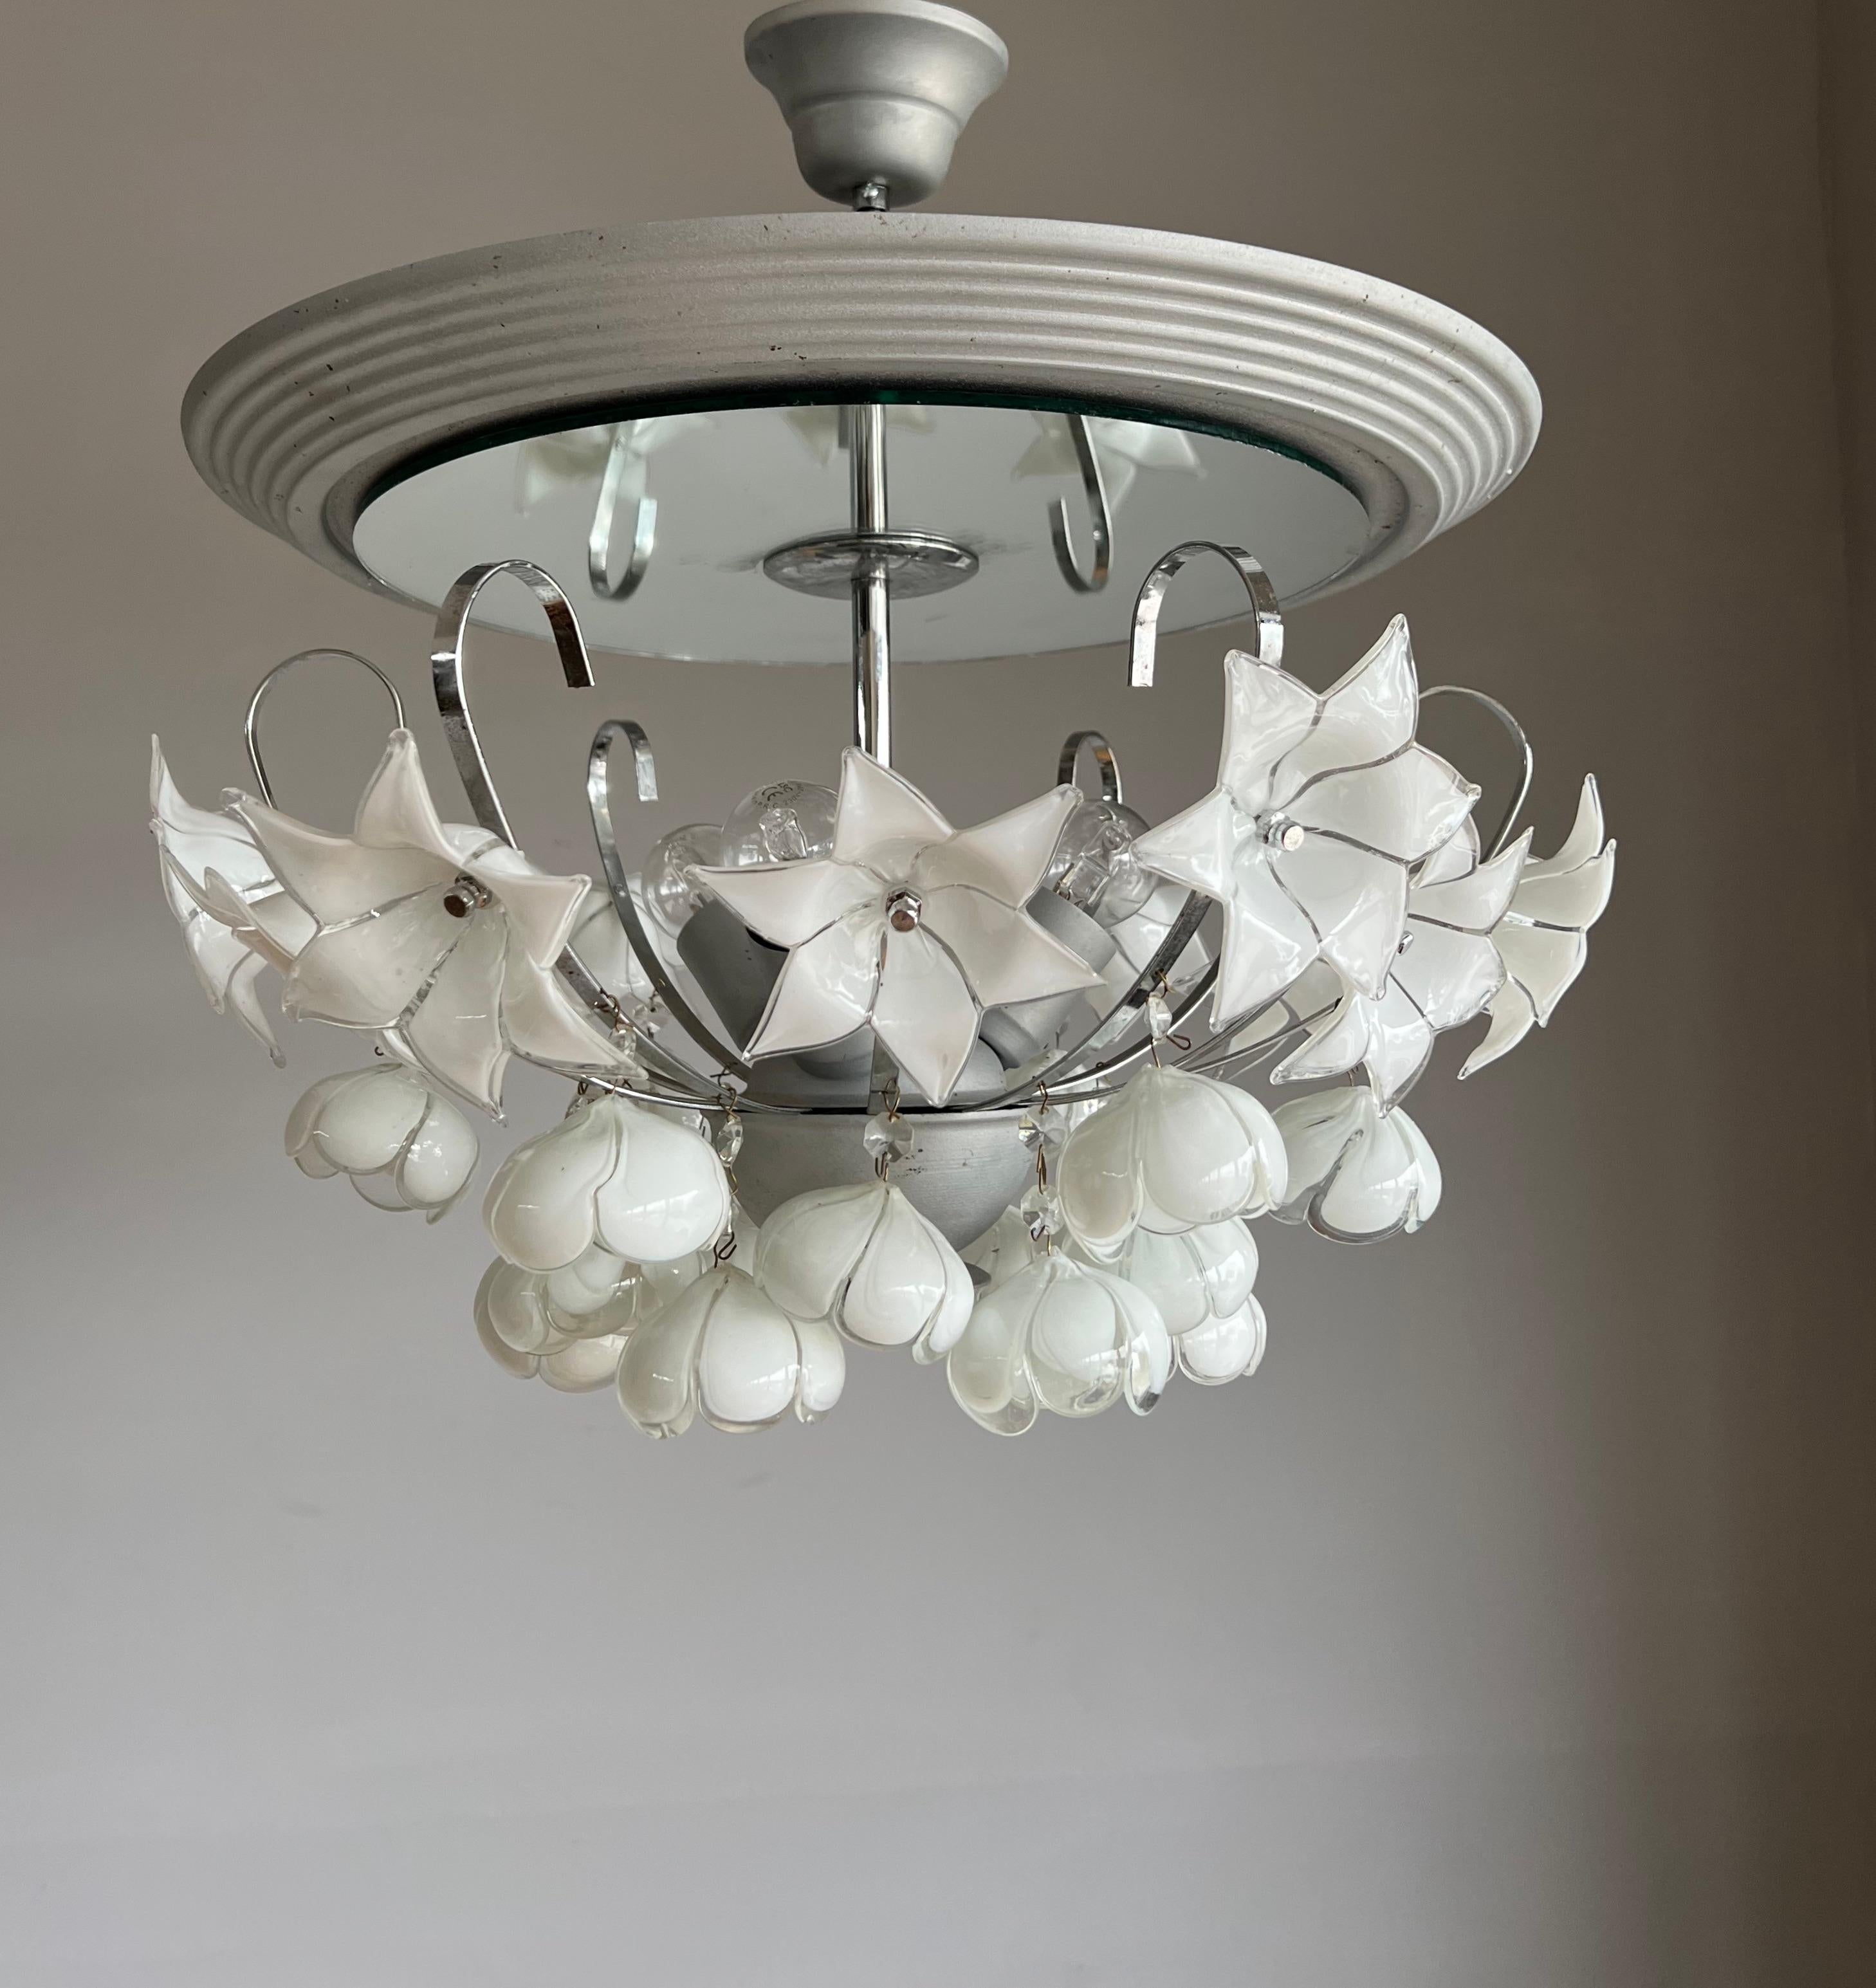 Mouth blown white glass flower bouquet light fixture with integrated ceiling mirror.

If you are looking for a striking and extraordinary light fixture to grace your living space then this, Italian work of lighting art could be the one for you. This